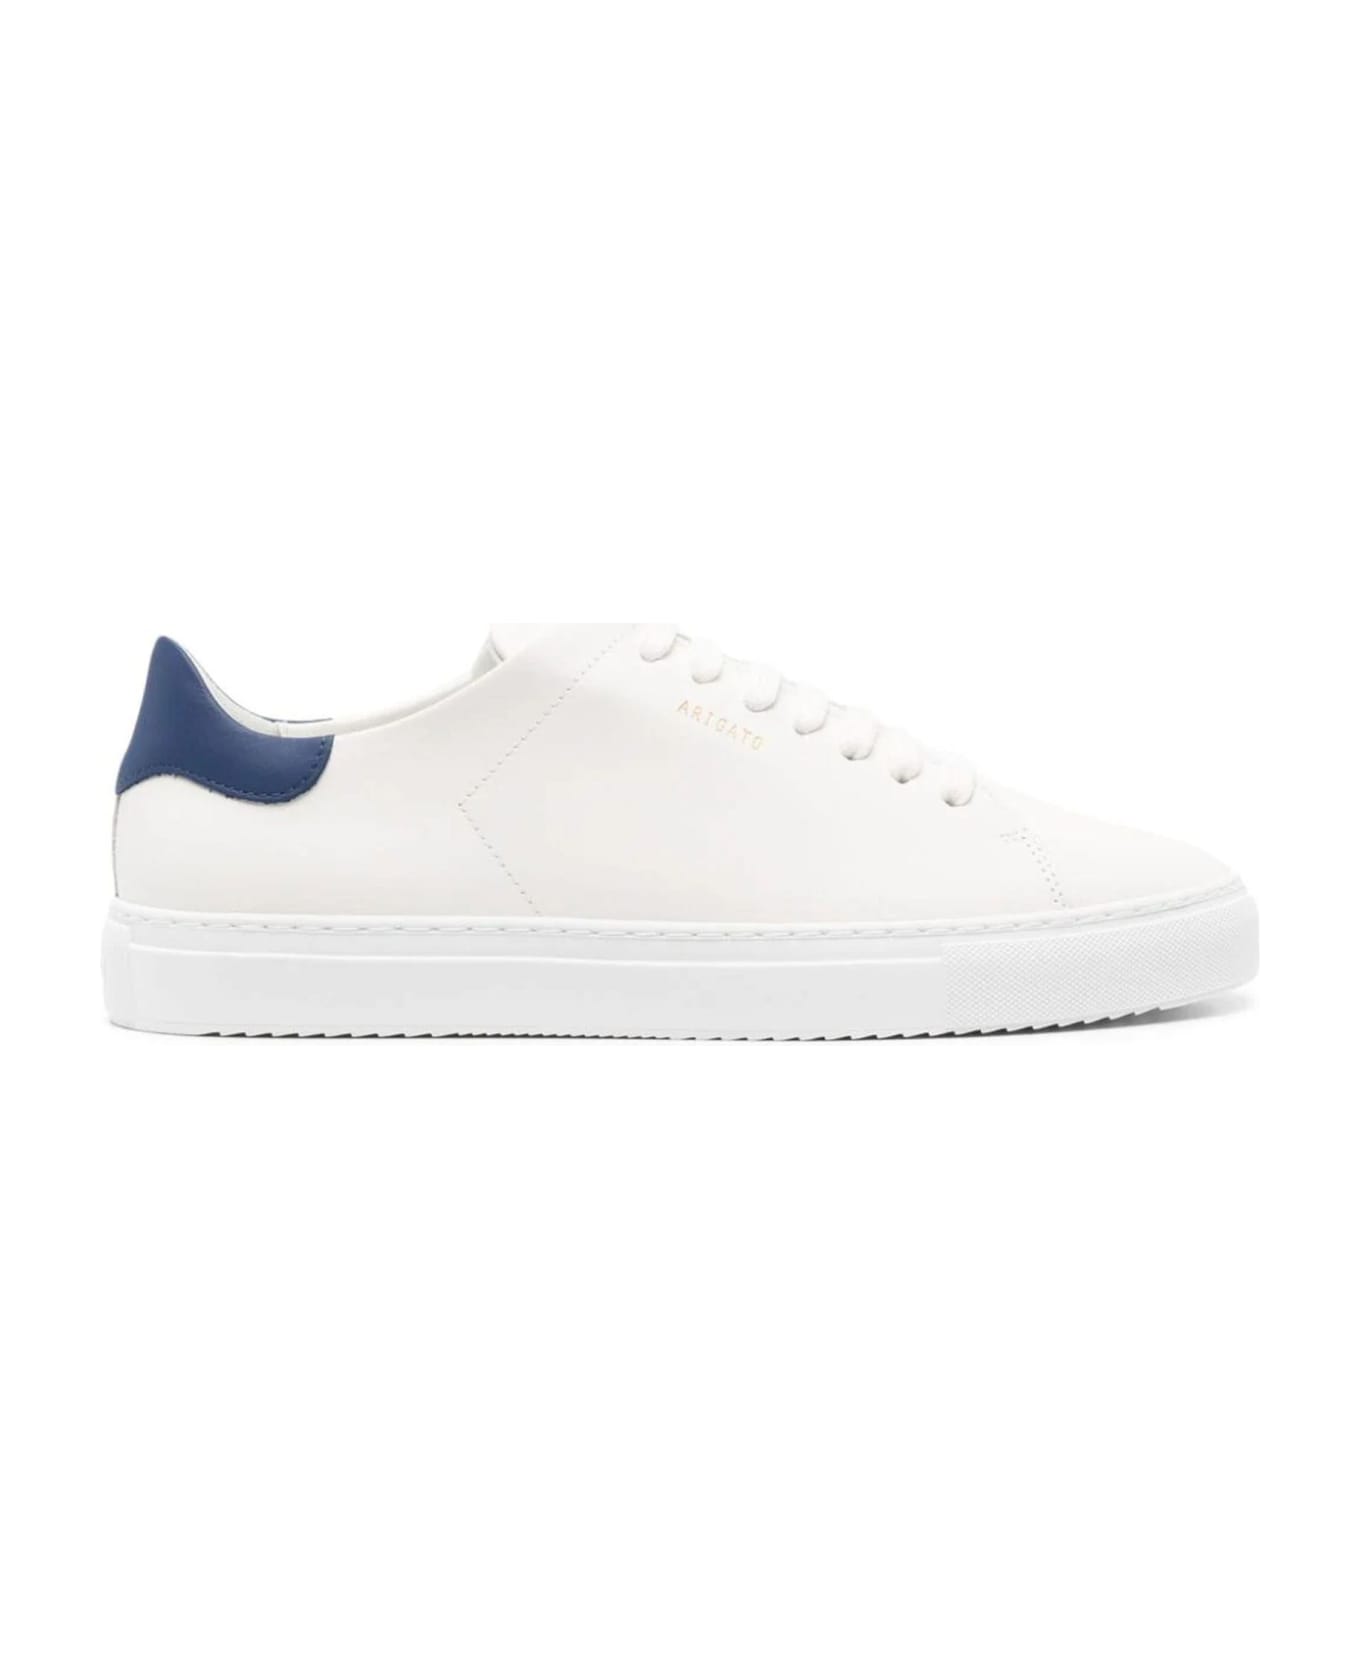 Axel Arigato White Clean 90 Leather Sneakers - White Navy スニーカー